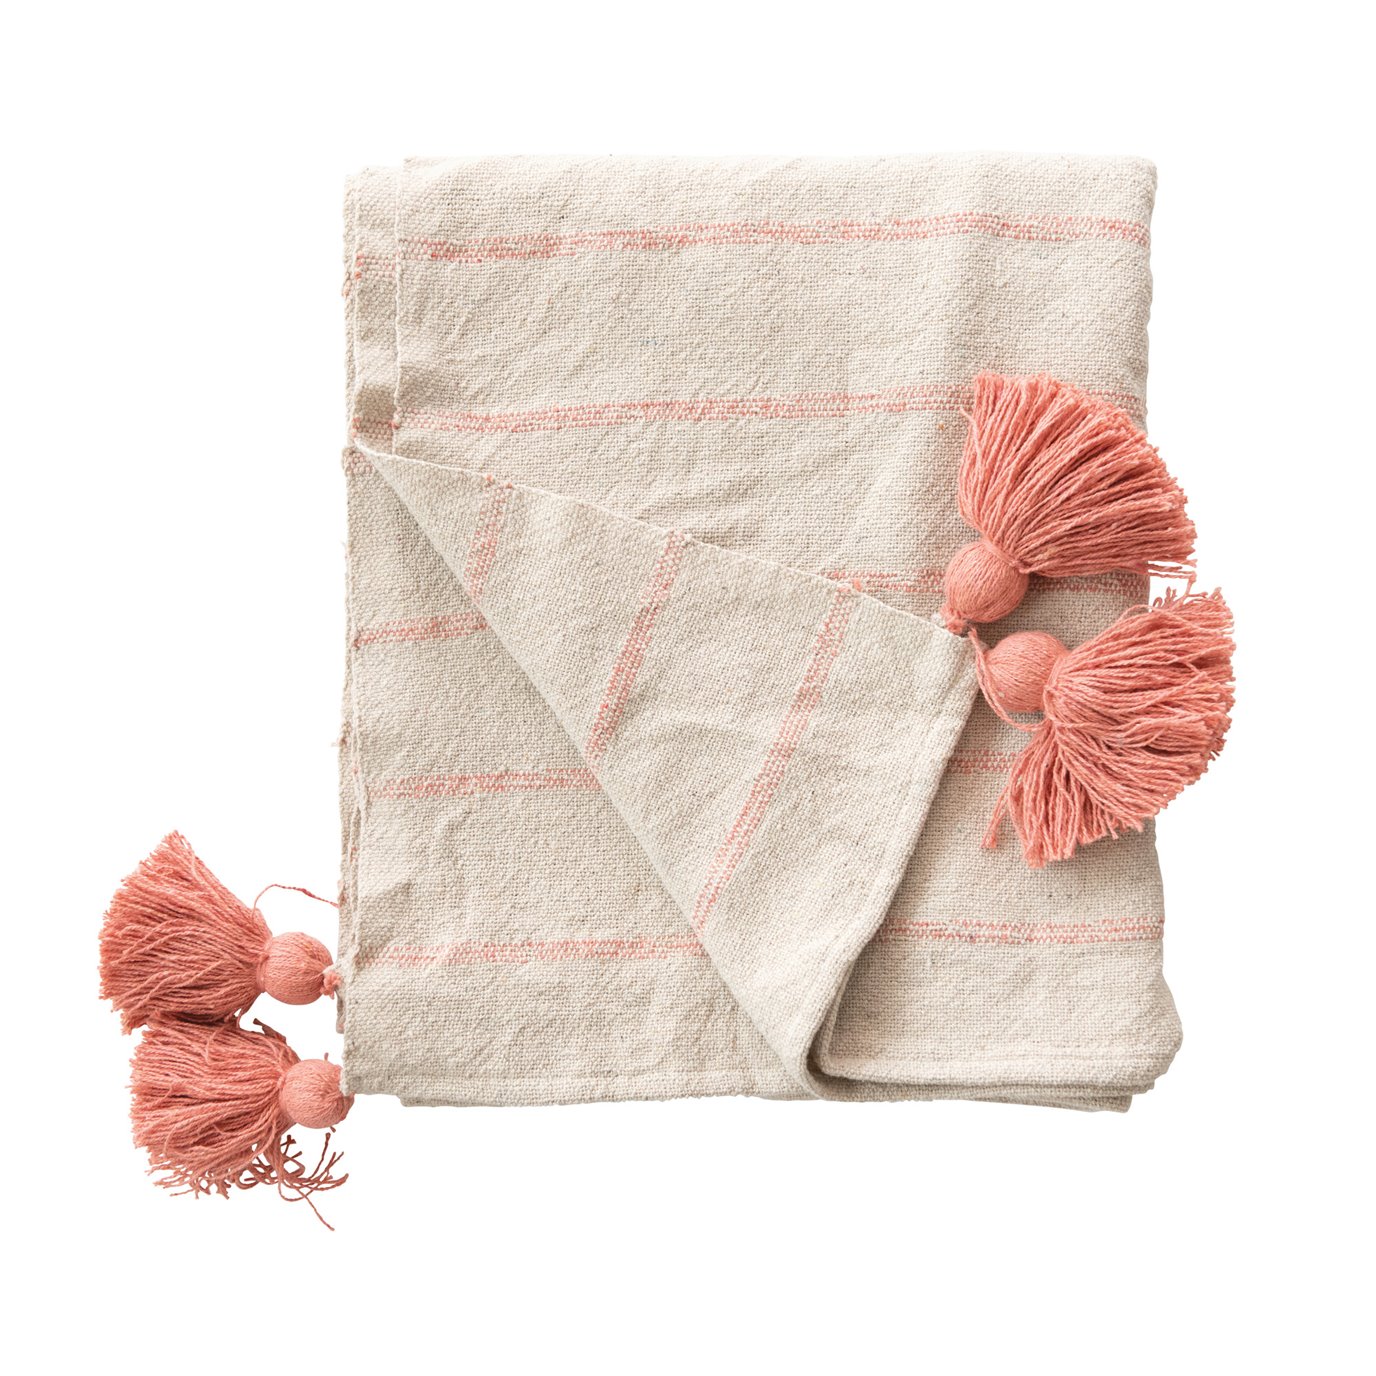 Stripes & Tassels Pink Woven Recycled Cotton Throw